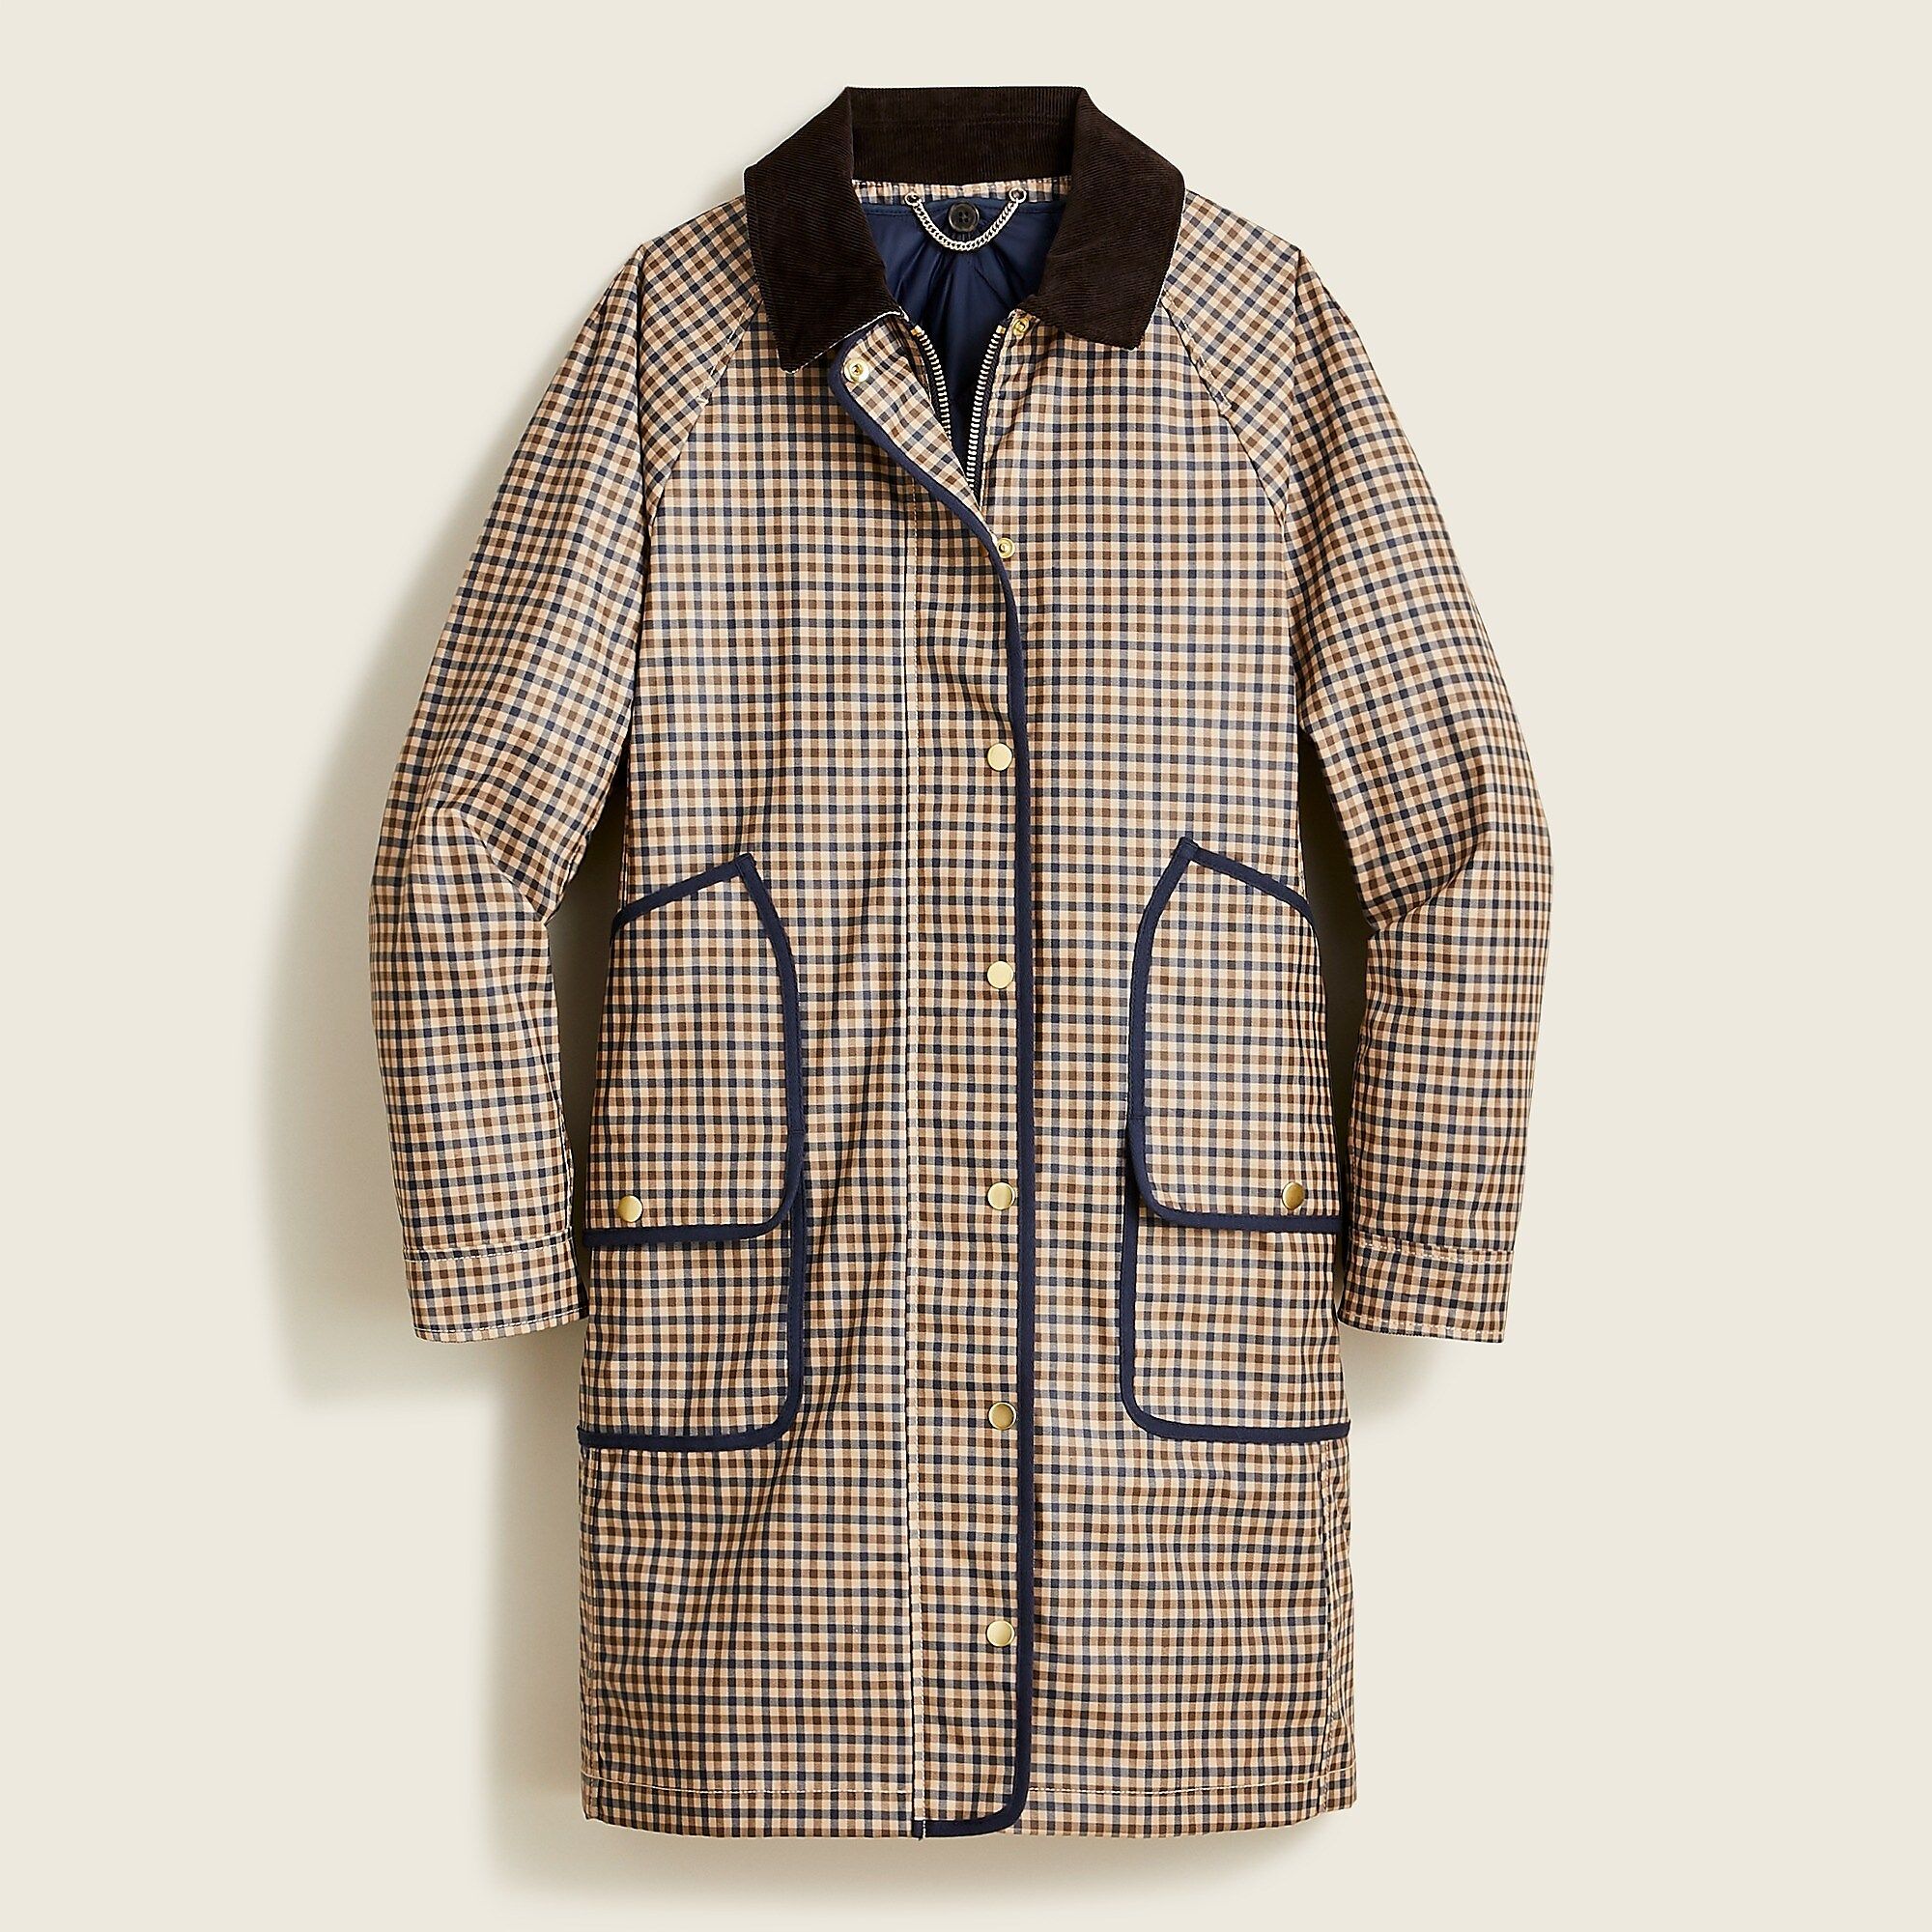 Long Barn Jacket™ with removable PrimaLoft® liner in honey plaid | J.Crew US